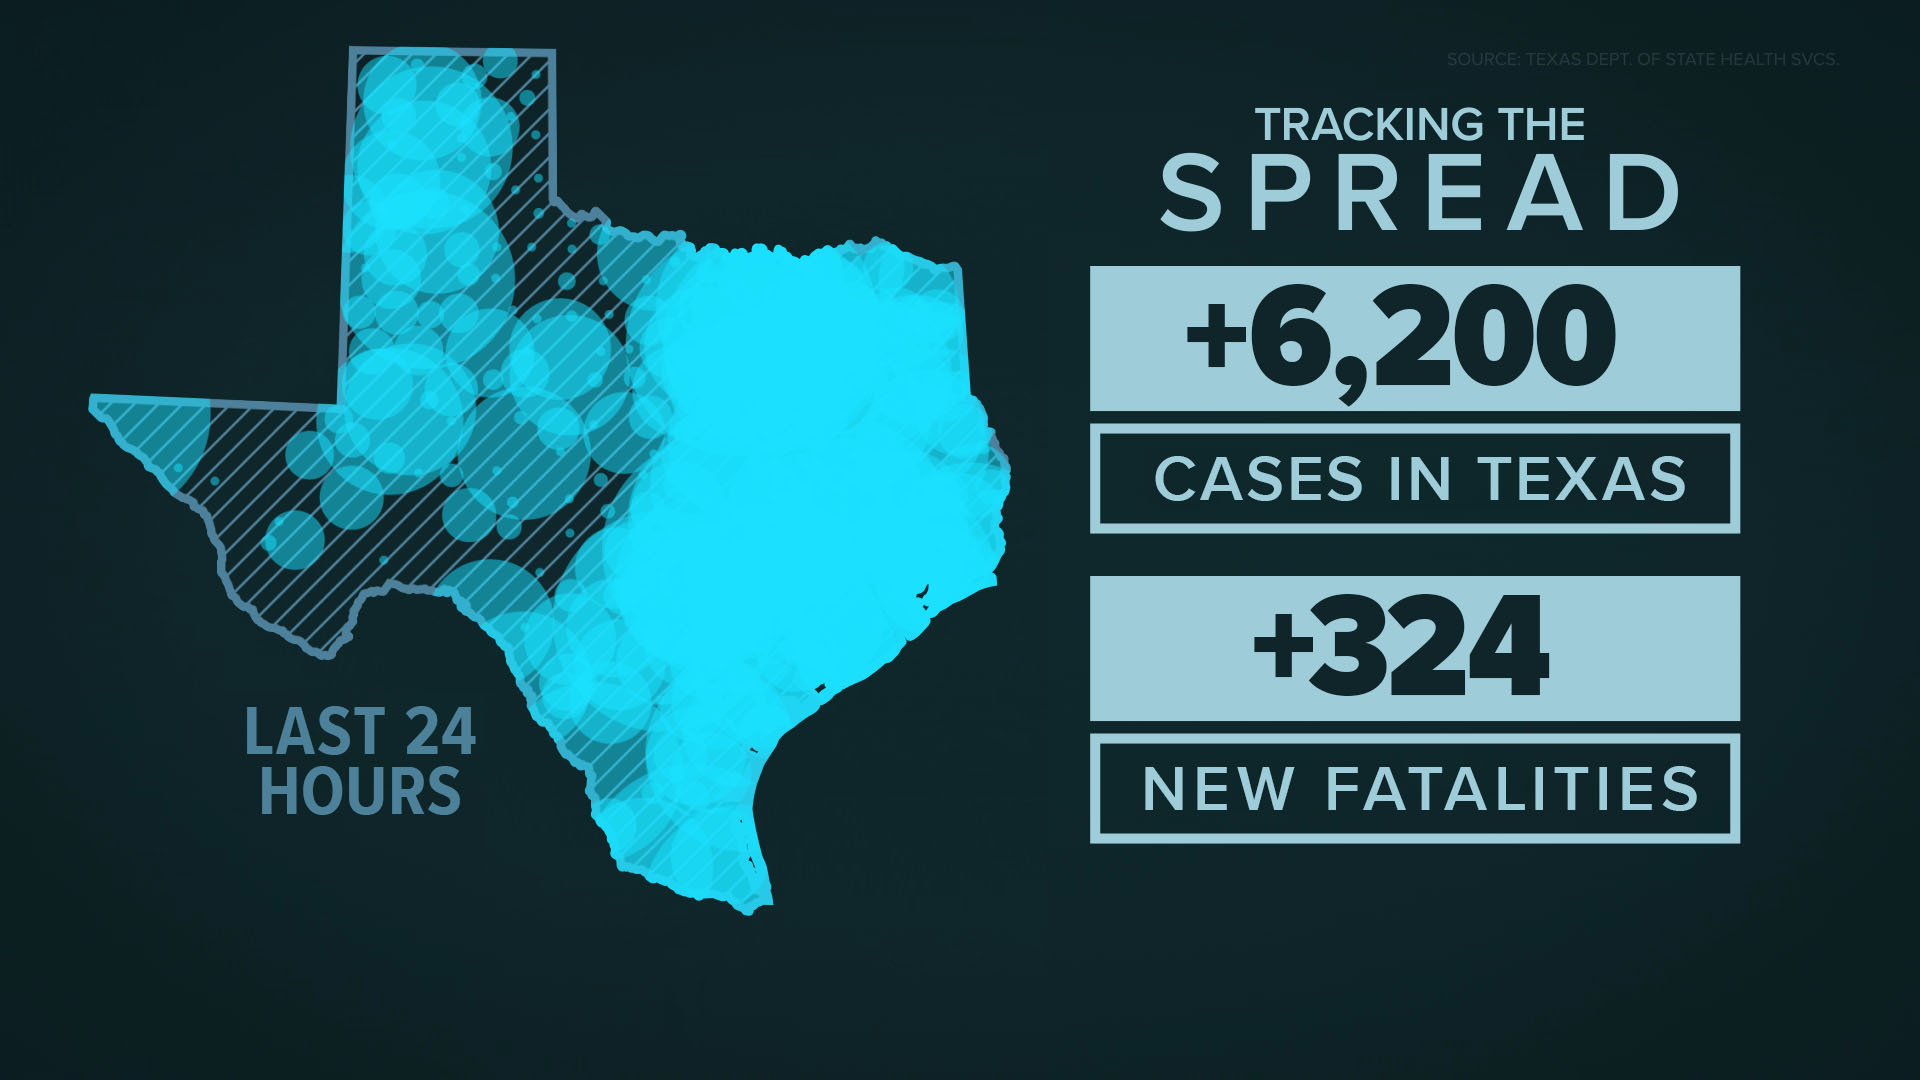 Texas is now fourth in the country for coronavirus deaths, behind New York, New Jersey and California.